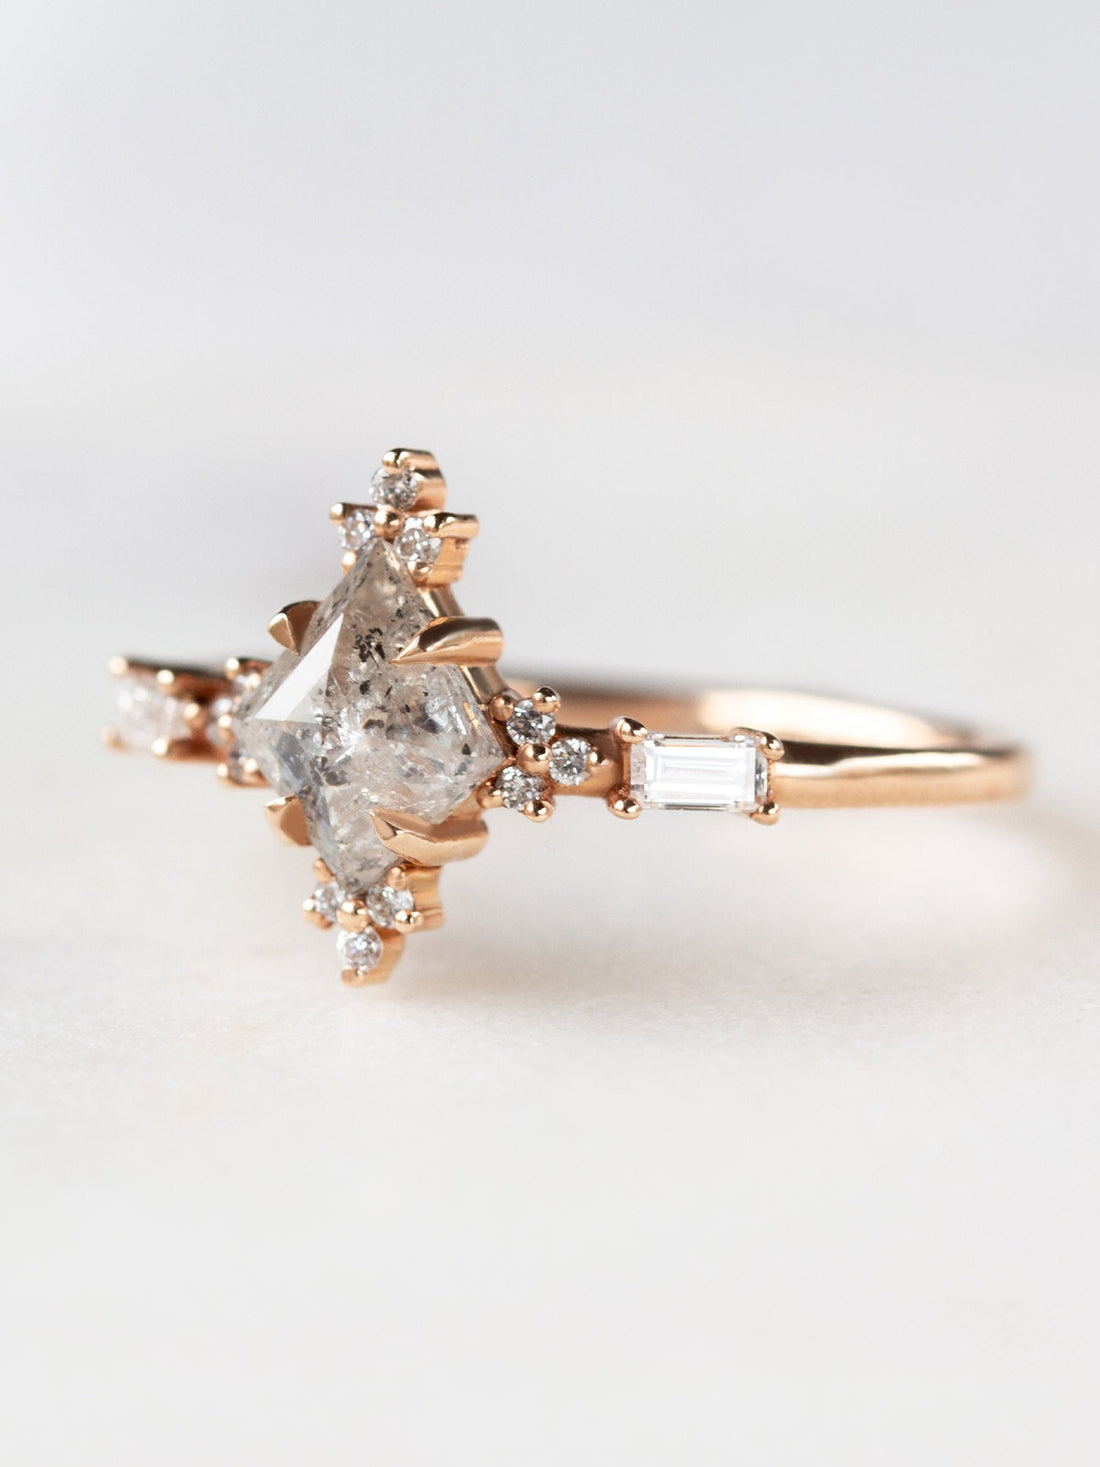 Art deco style minimal kite shape salt and pepper diamond engagement ring in 14k rose gold with smaller baguette and round diamonds.